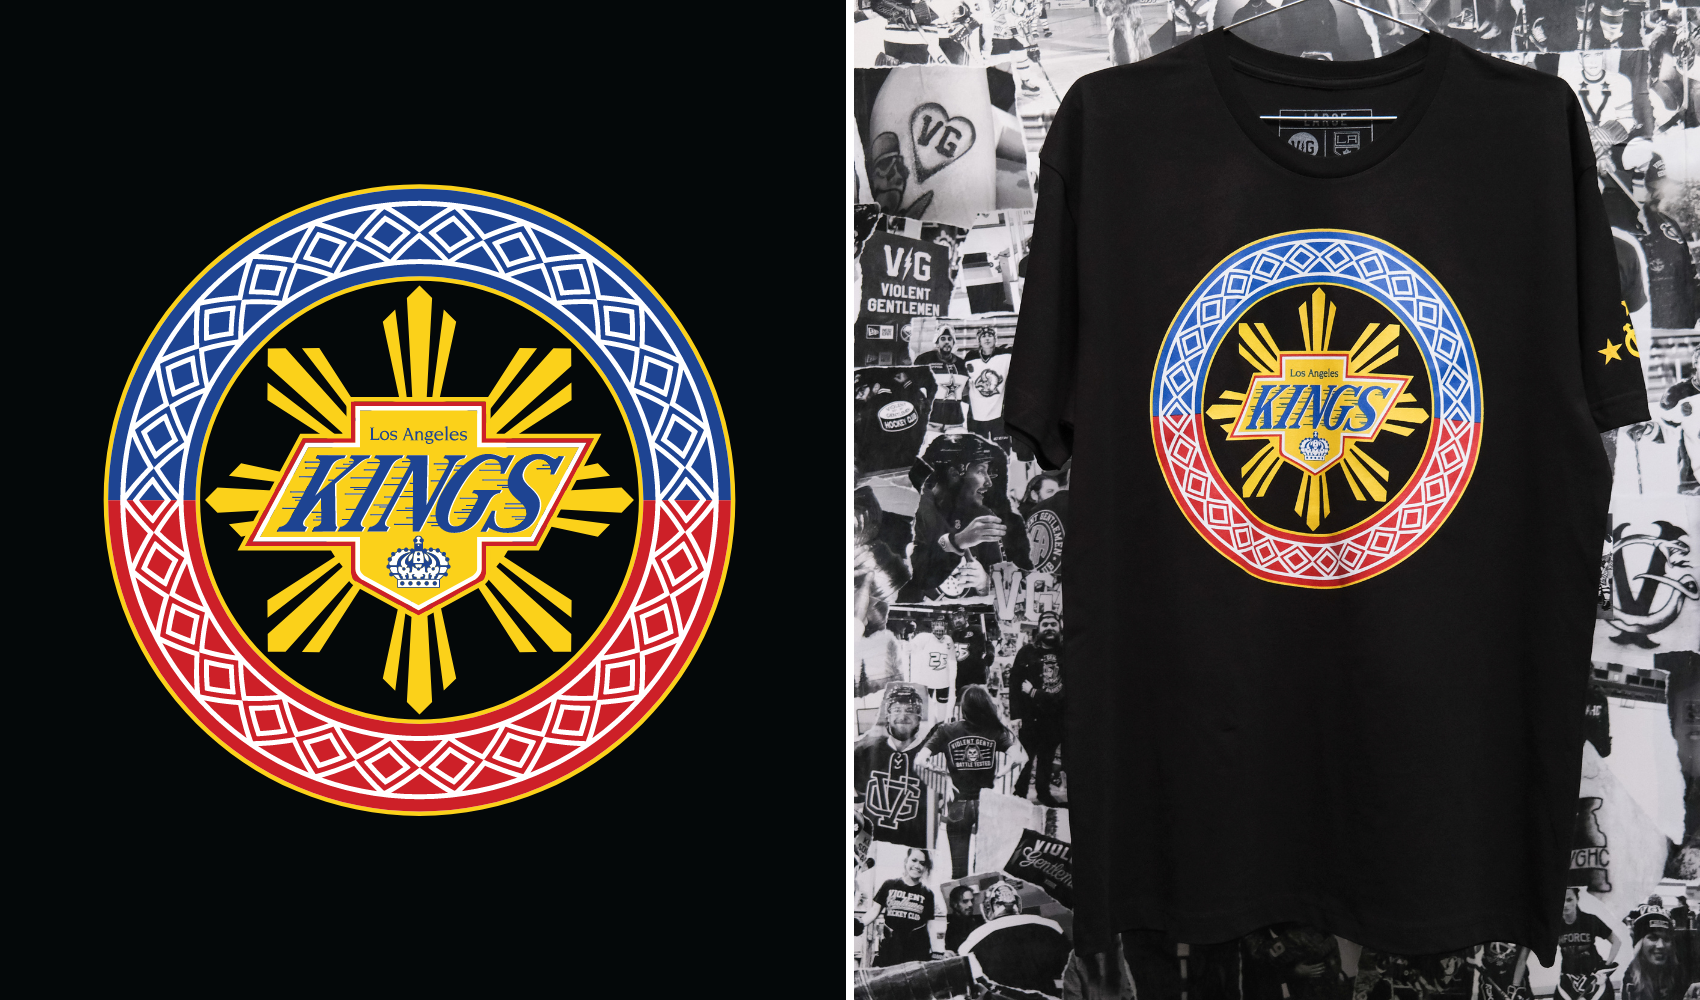 When we looked at the lineup of Los Angeles Kings Heritage Nights, this one stuck out to our production manager, Vince Apostol. Being a Filipino American who grew up in Los Angeles playing youth hockey this one means a lot. To see his hometown Kings logo intertwined with traditional Filipino styling is a dream come true.